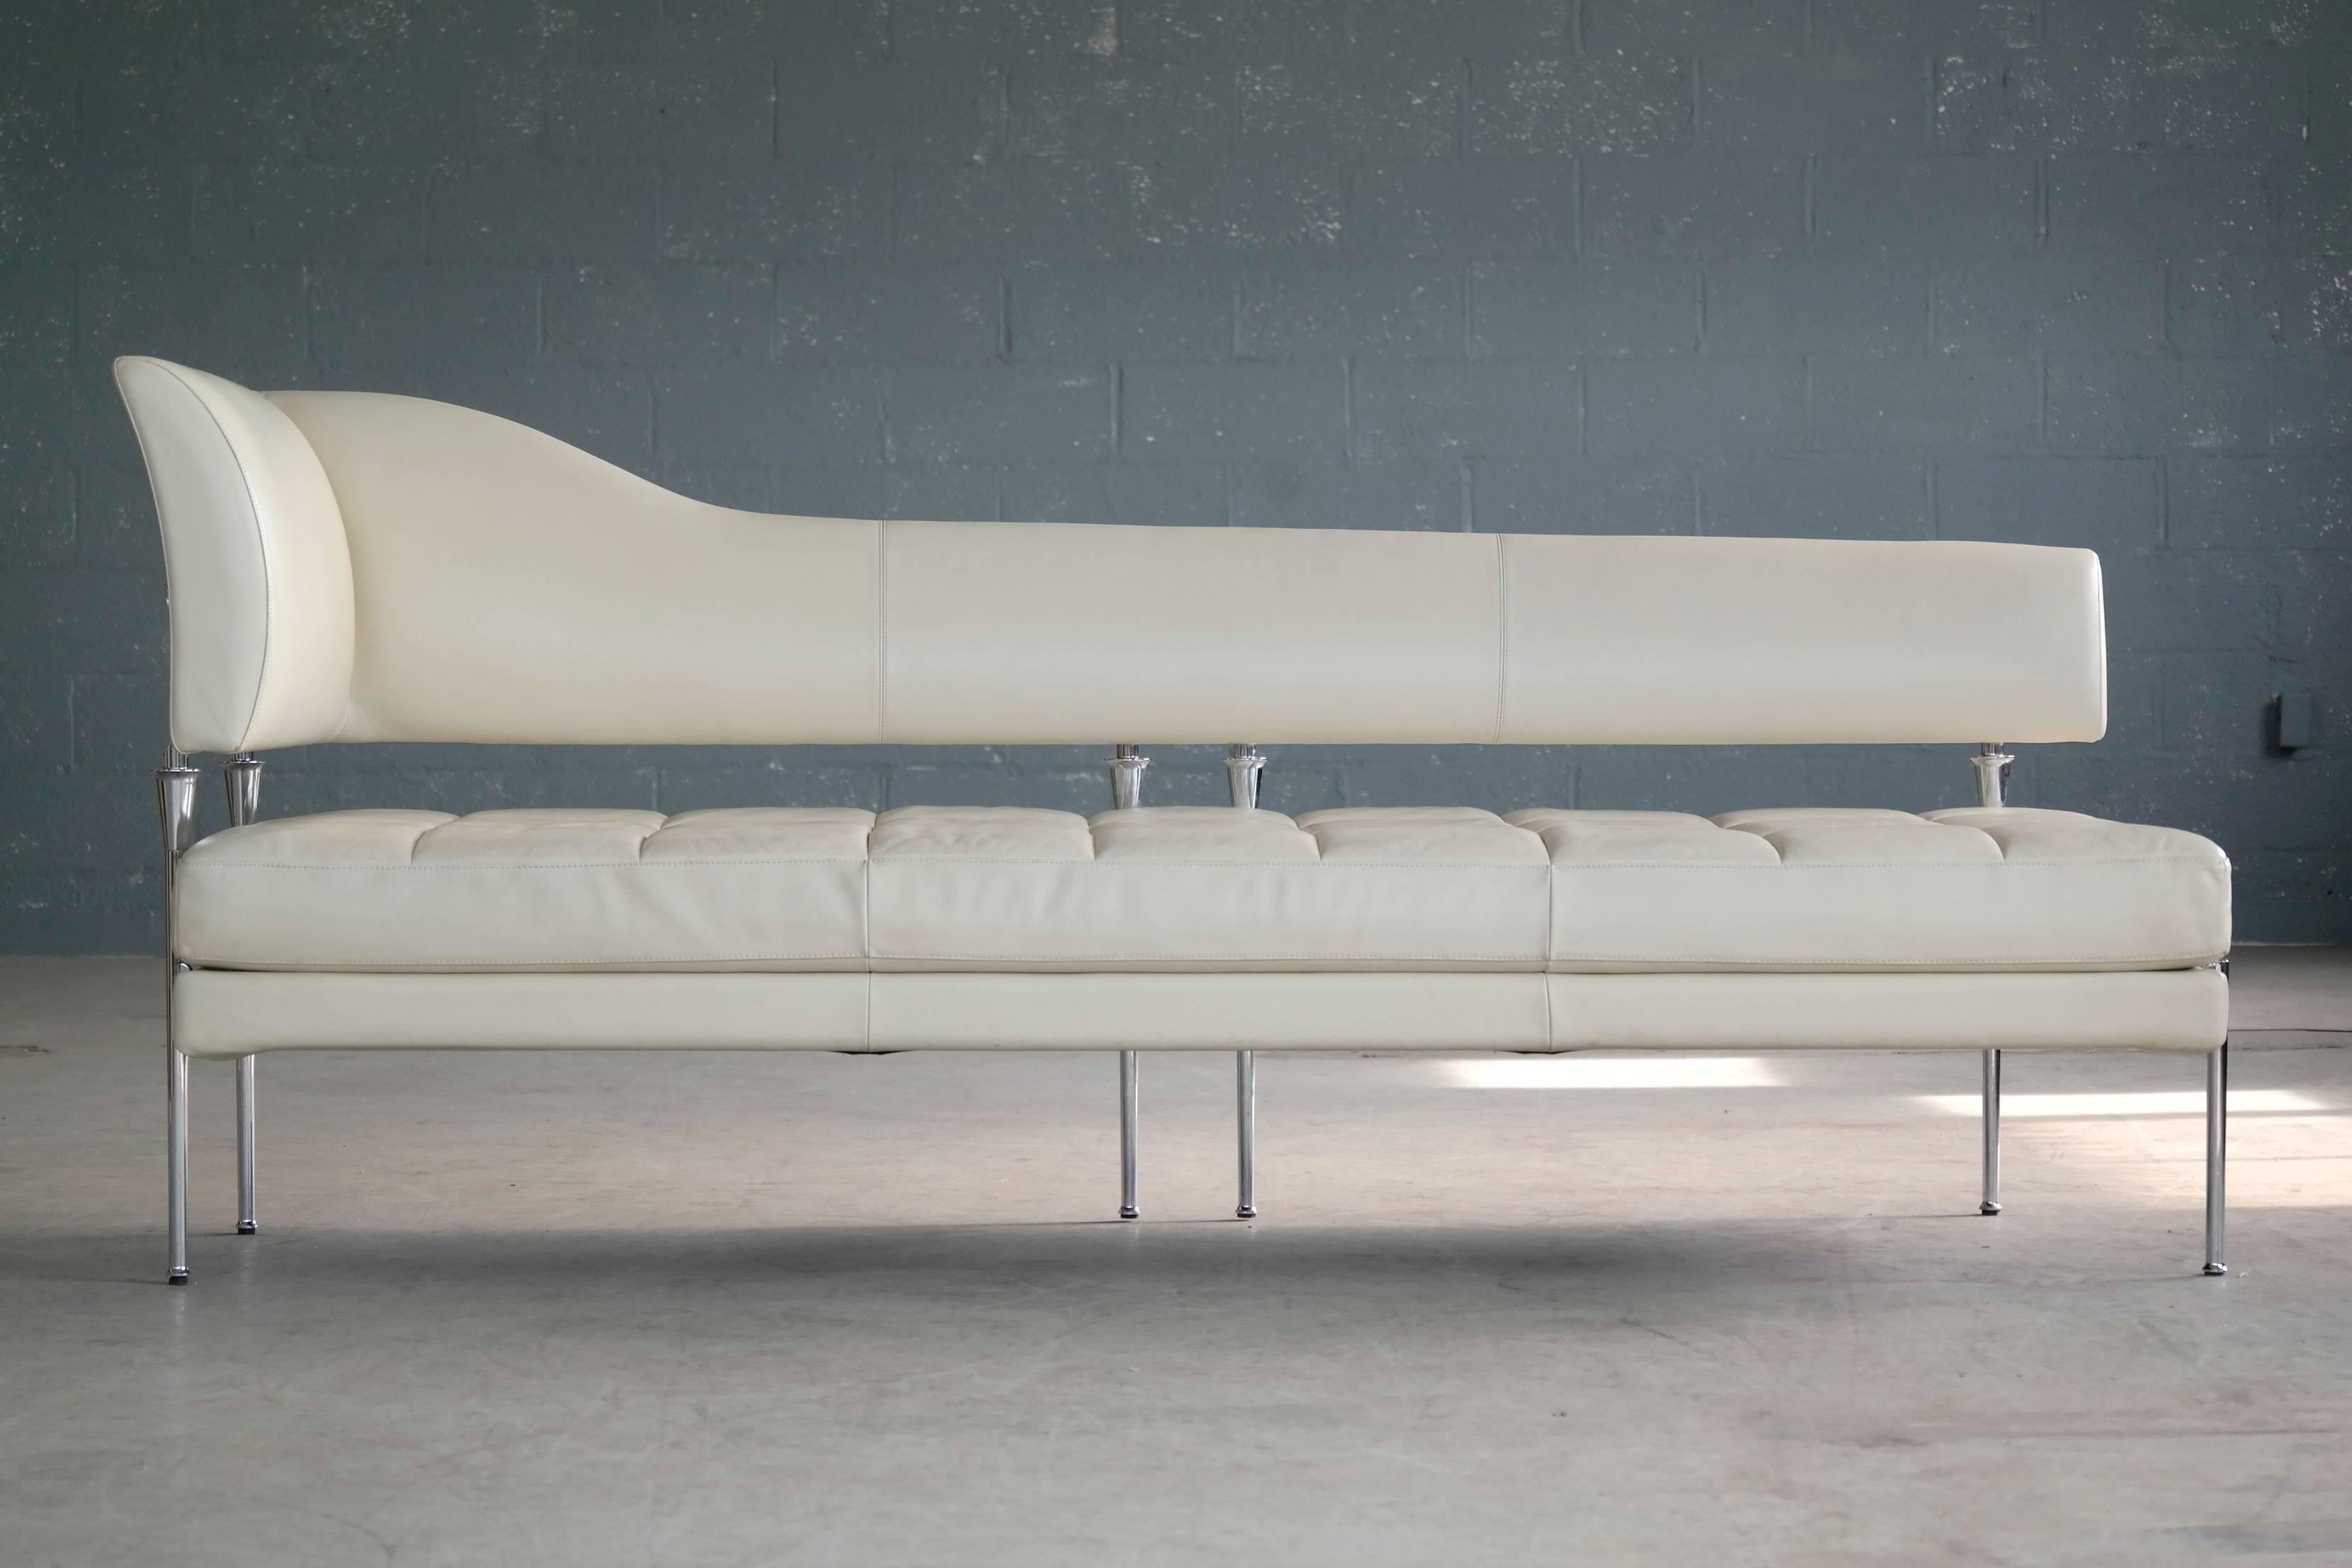 Superb design and unparalleled craftsmanship expressed in this modern Luca Scacchetti model Hydra chaise longue designed in 1992 for Poltrona Frau, Italy. Poltrona Frau pieces are the epitome of contemporary European furniture design of the highest